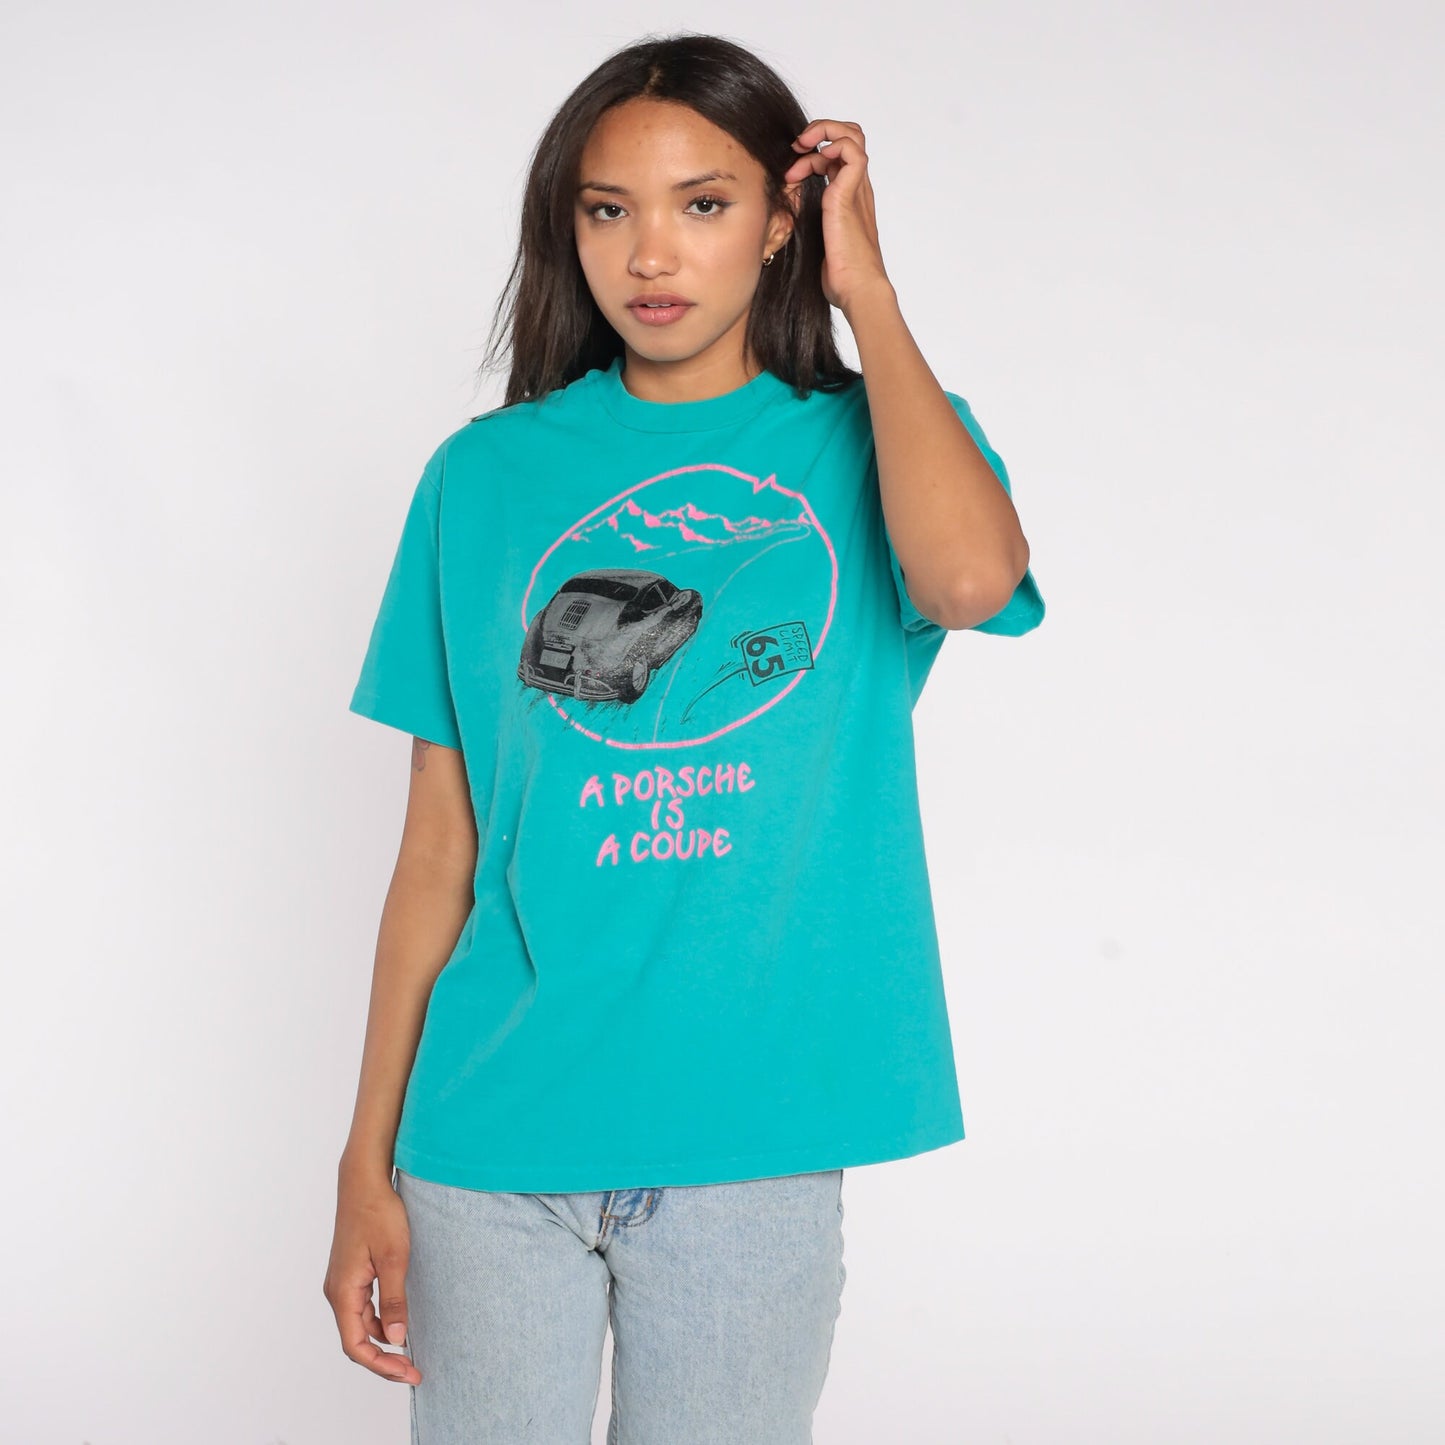 Vintage Porsche Shirt 80s 90s Classic Car TShirt A Porsche Is a Coupe Sports Car Turquoise Green Mountain Graphic T Shirt Tee 1990s Small